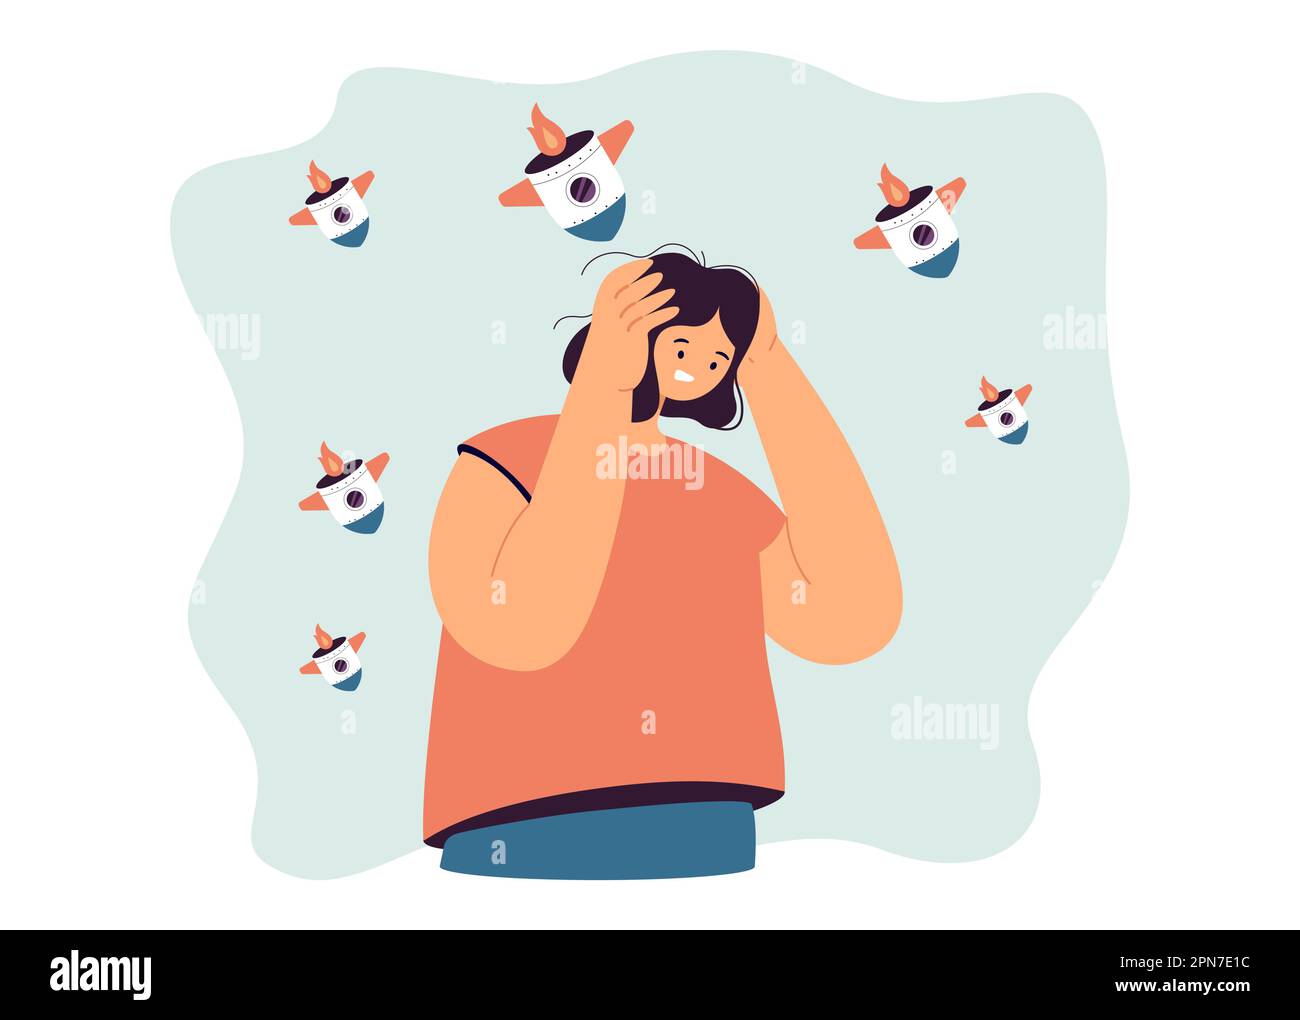 Fear, despair and stress in woman from war Stock Vector